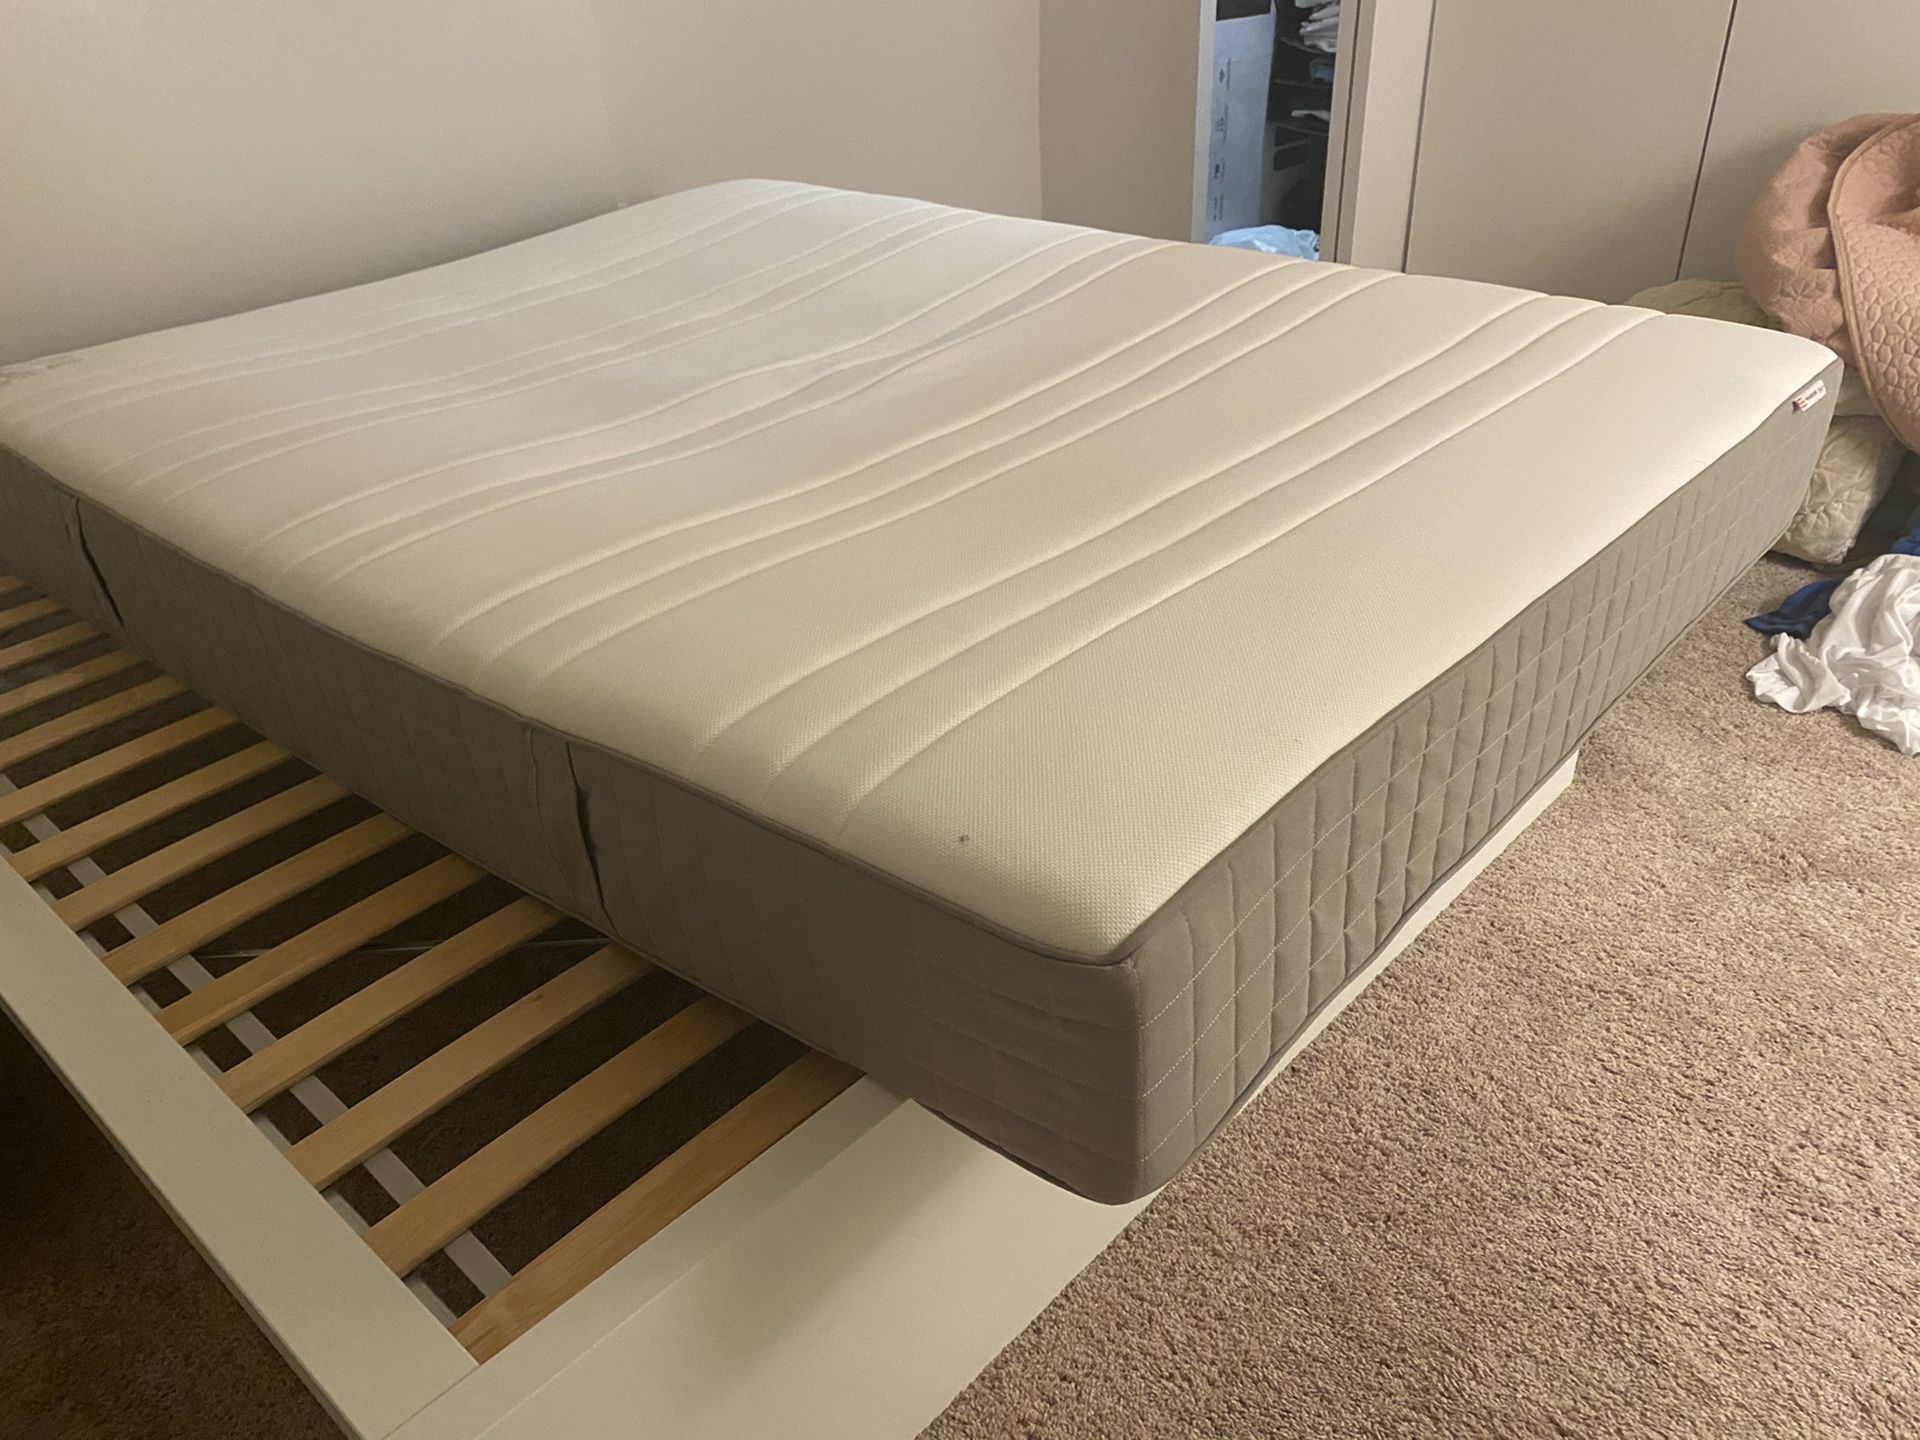 IKEA queen bed mattress (without bed frame)